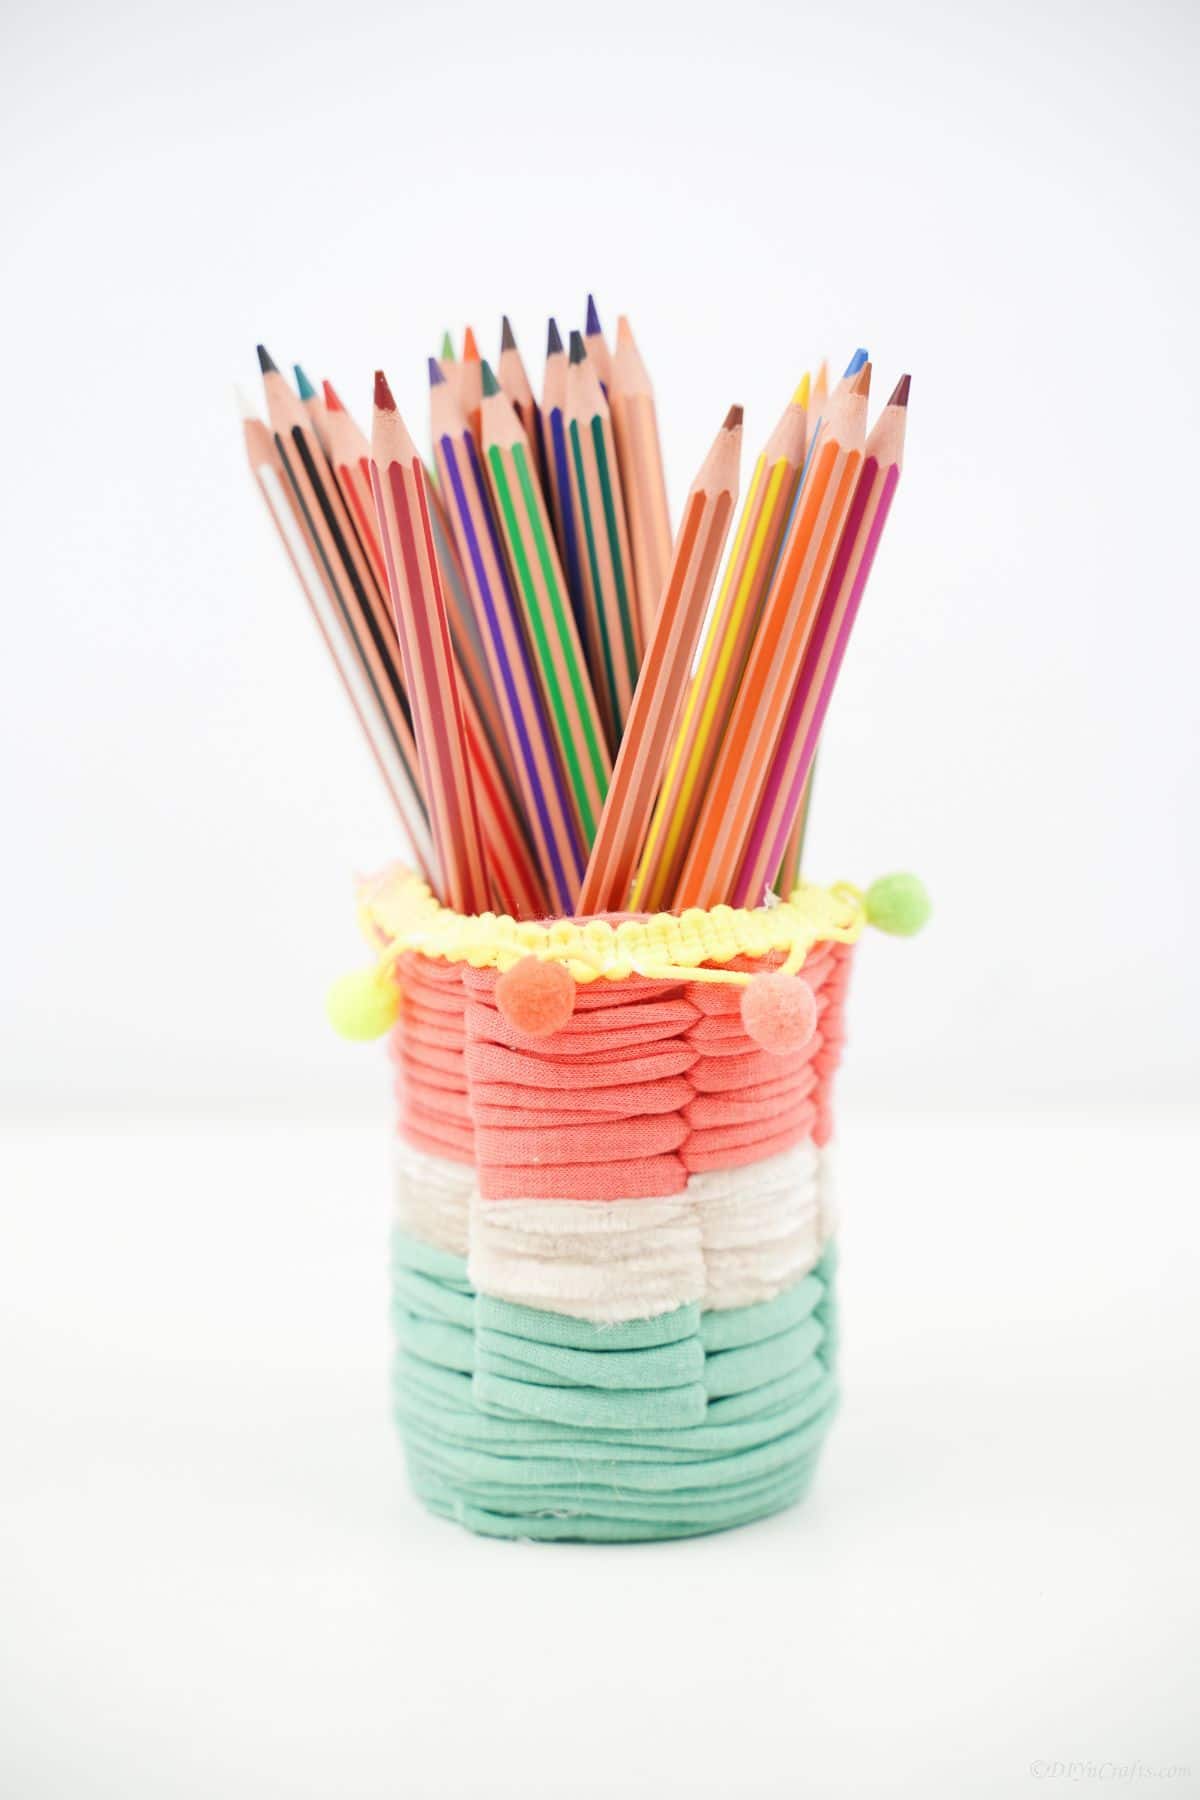 pink green and white thread covered with pencil container on white table